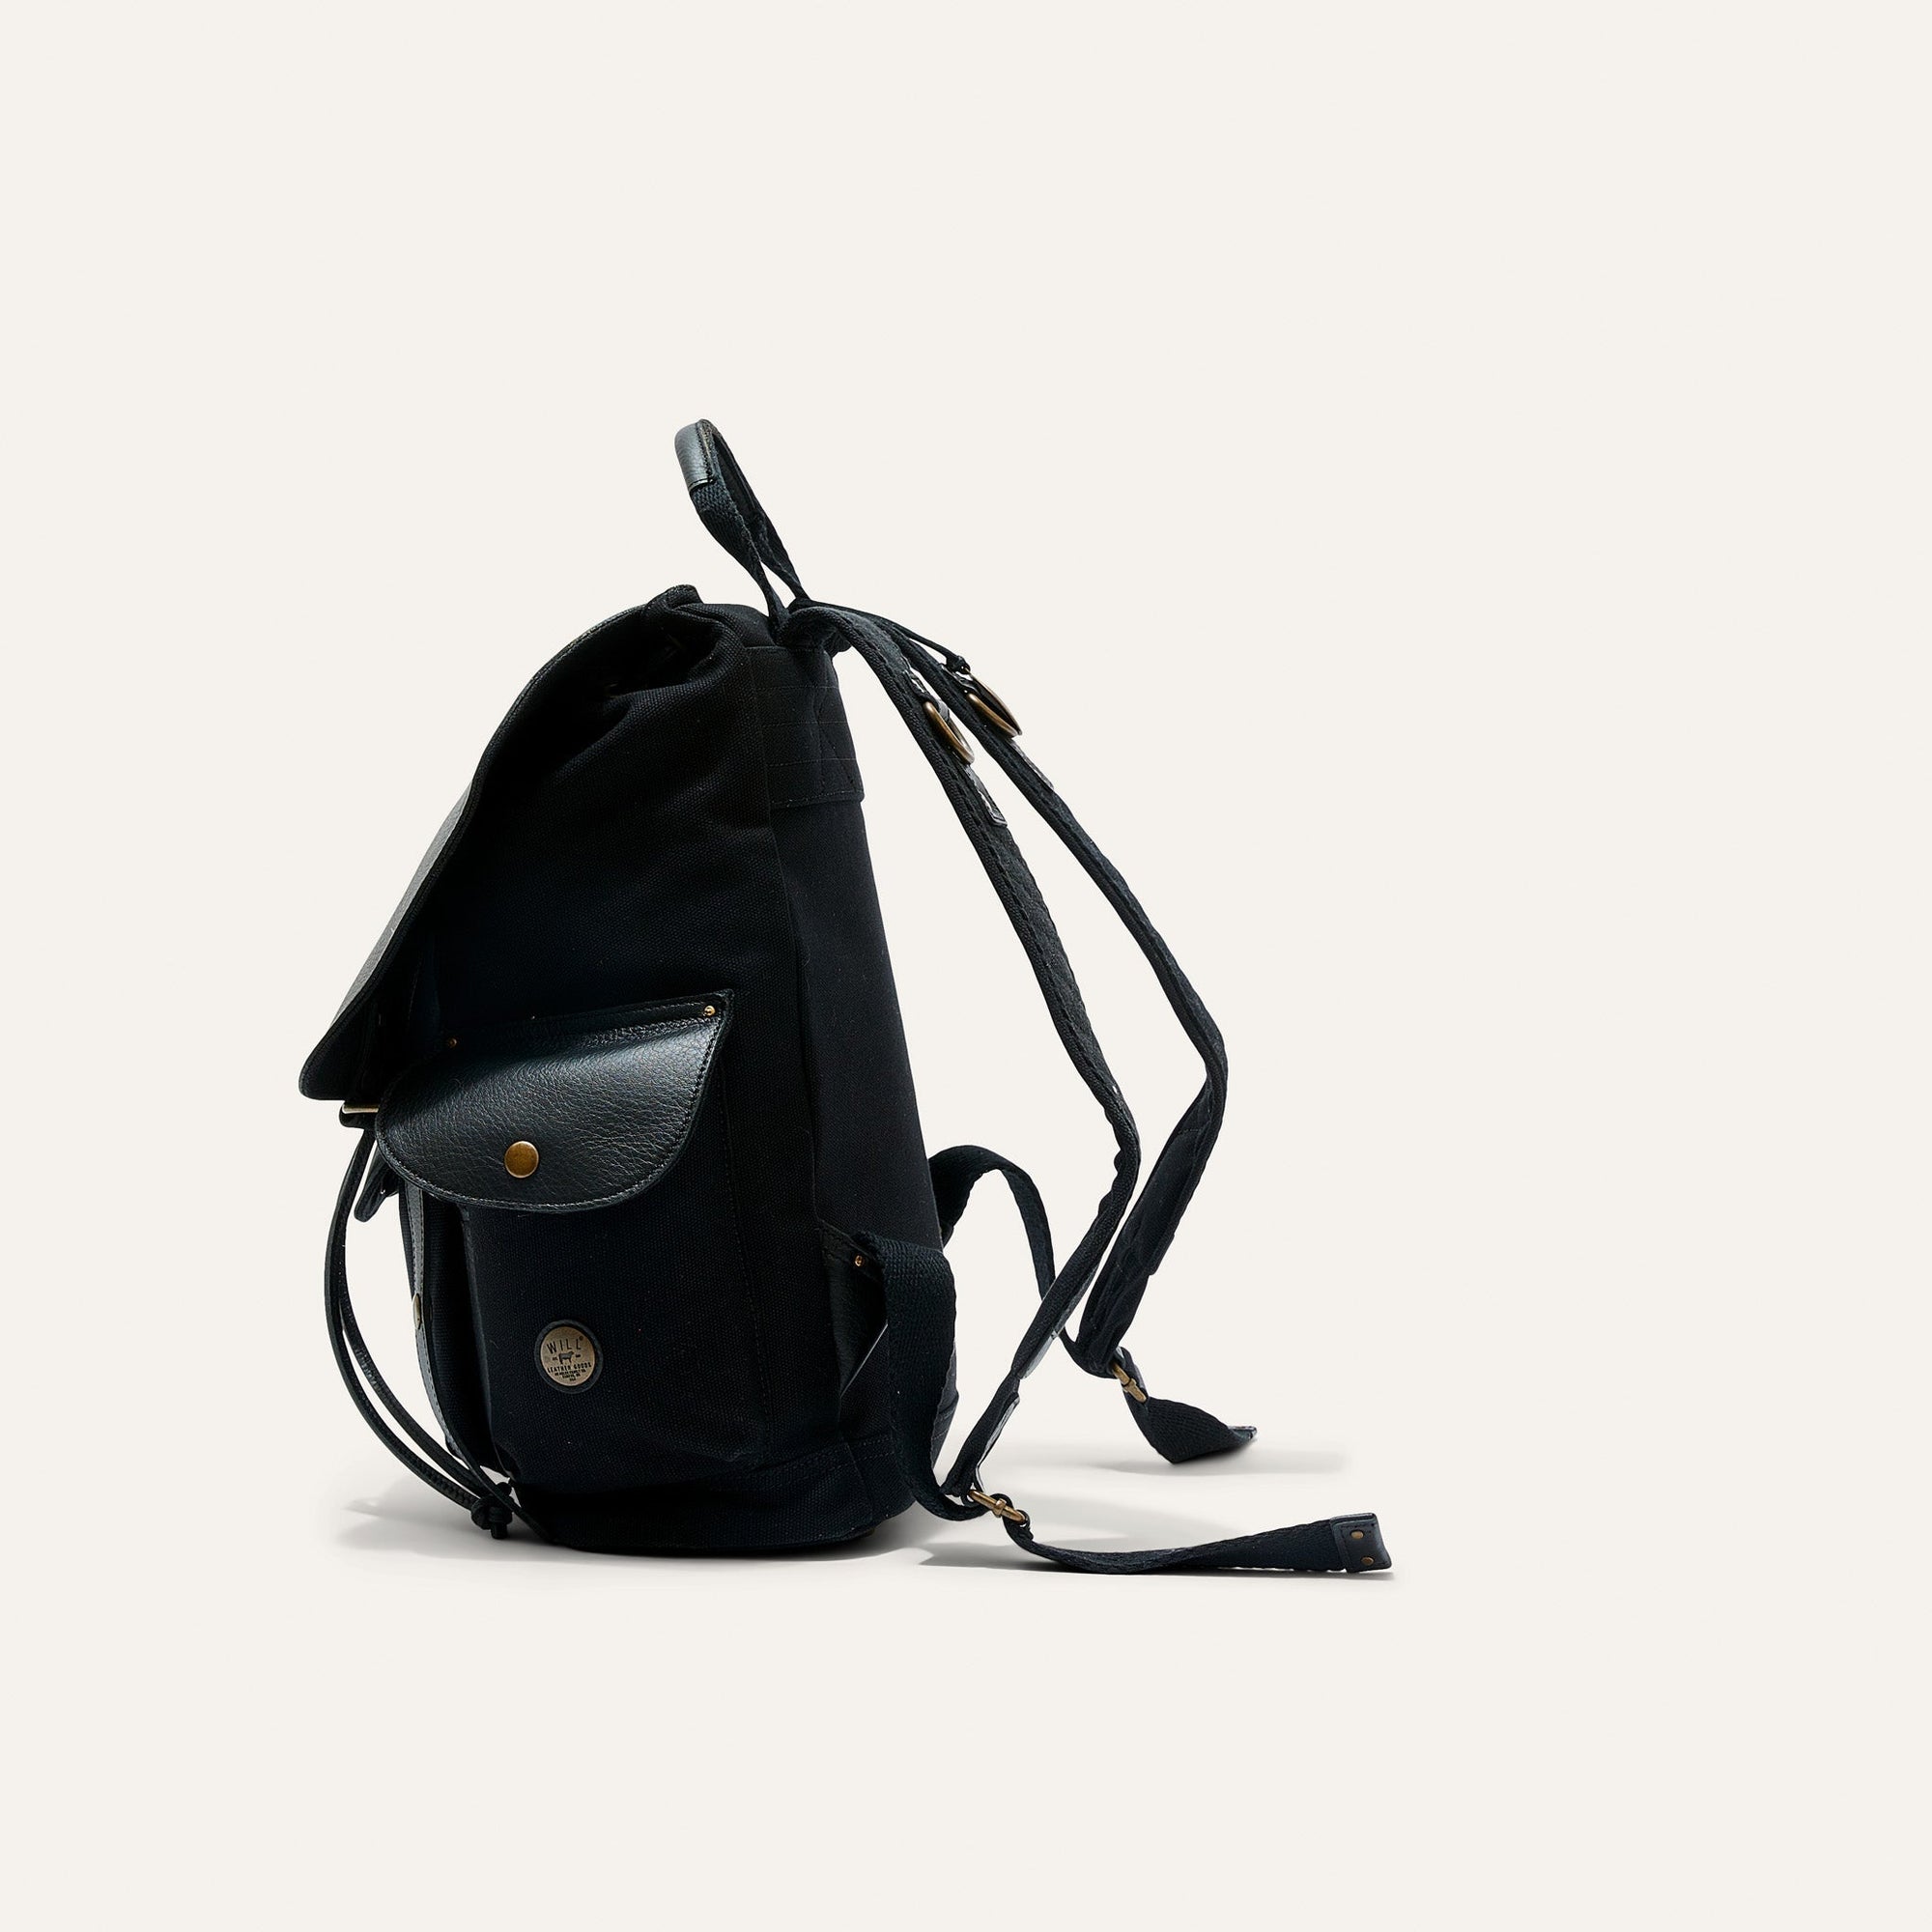 Lennon Canvas and Leather Backpack in Black with Black Leather by Will Leather Goods